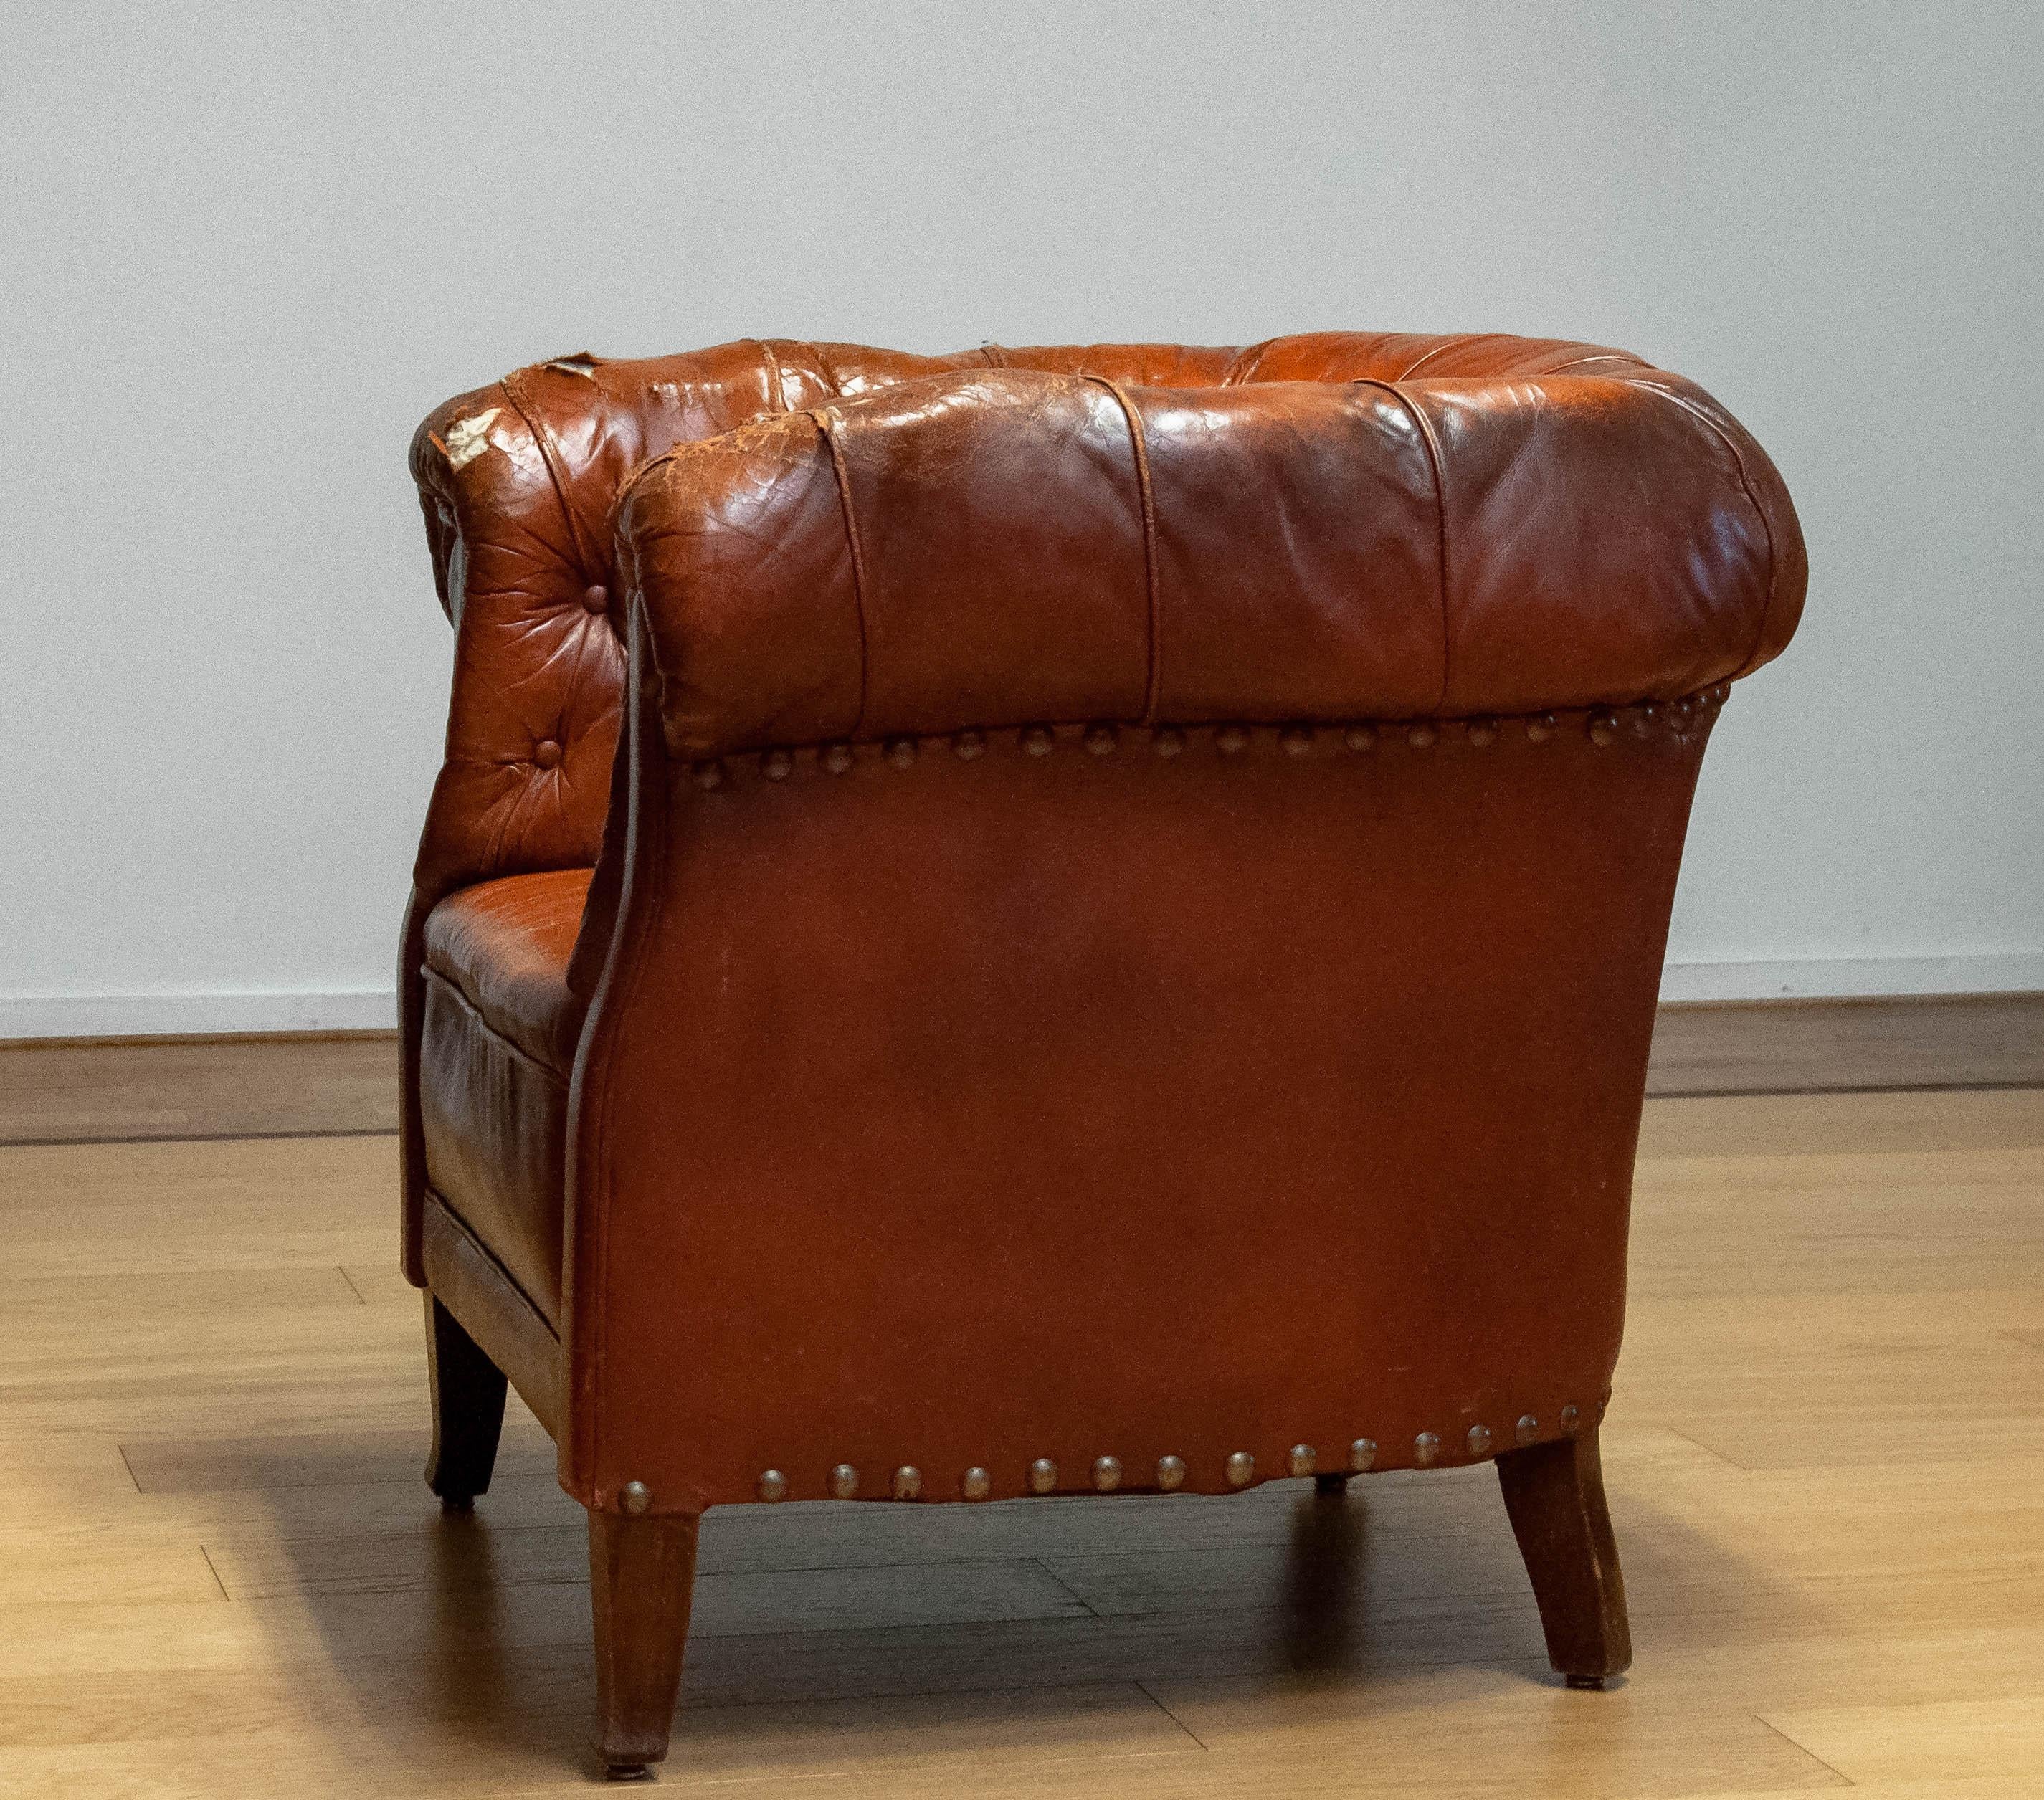 1940s Swedish Tufted Club Chair 'Chesterfield Model' In Tan Brown Worn Leather 5